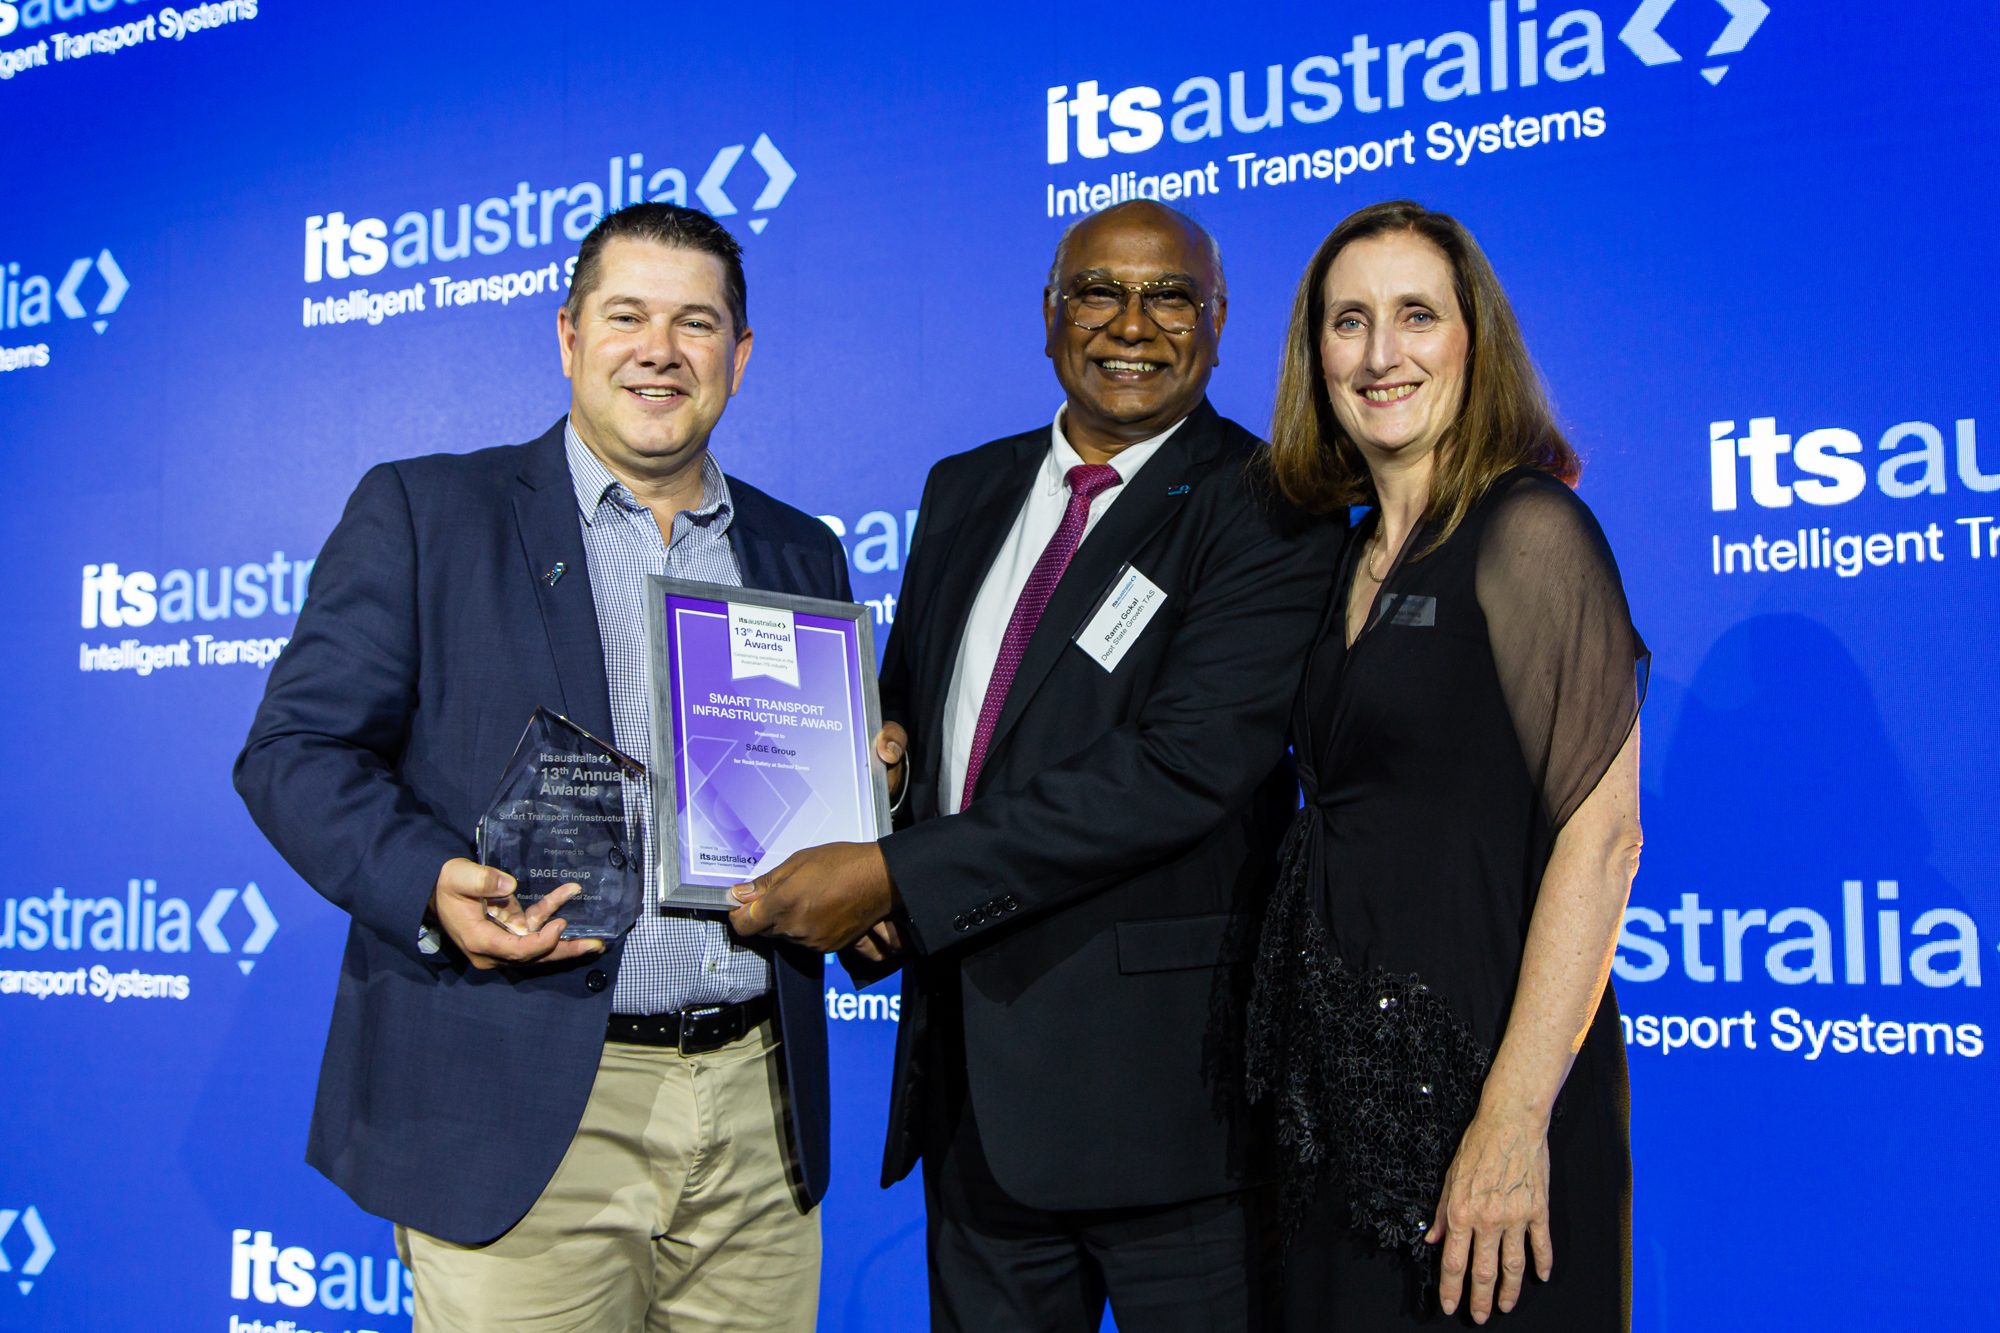 Damian Hewitt, SAGE Group and Ramesh Gokal, Tasmanian Department of State Growth accepted the Smart Transport Infrastructure Award from Susan Harris, ITS Australia.